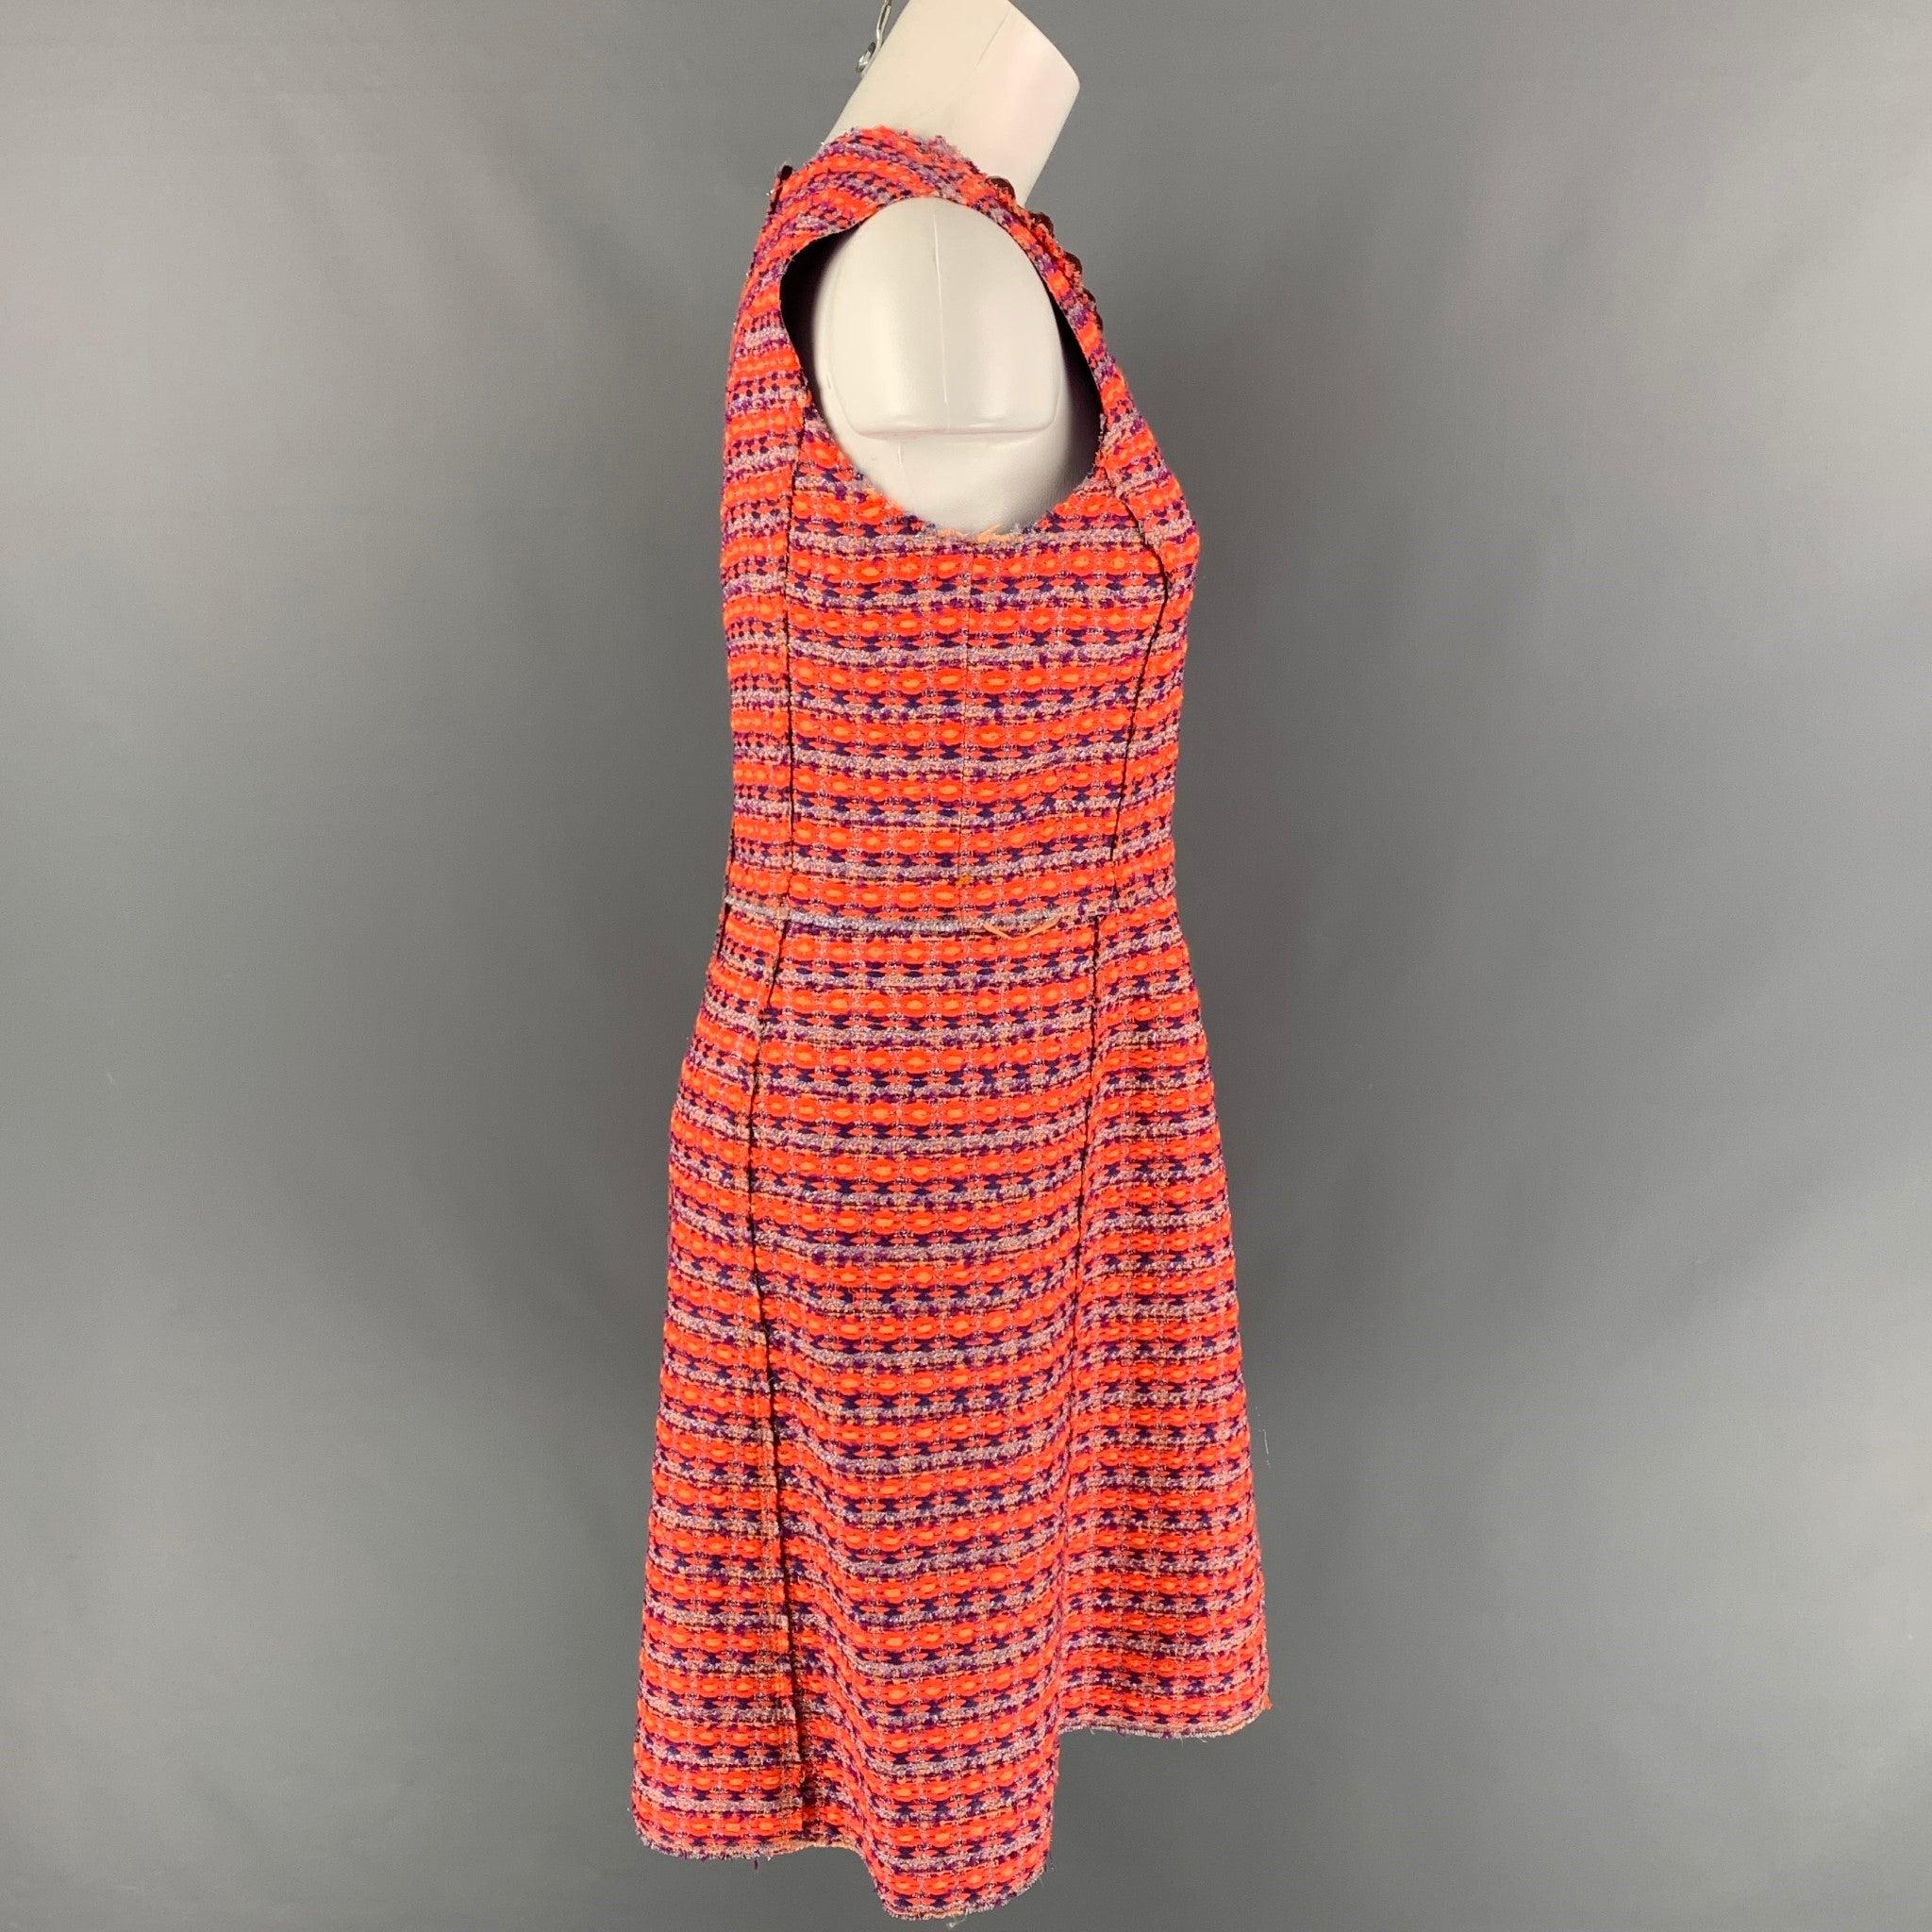 MARC JACOBS dress comes in a orange & purple tweed acrylic blend featuring a shift style, beaded neckline, sleeveless, and a back zip up closure.
Very Good
Pre-Owned Condition. 

Marked:   8 

Measurements: 
 
Shoulder: 14 inches  Bust: 38 inches 